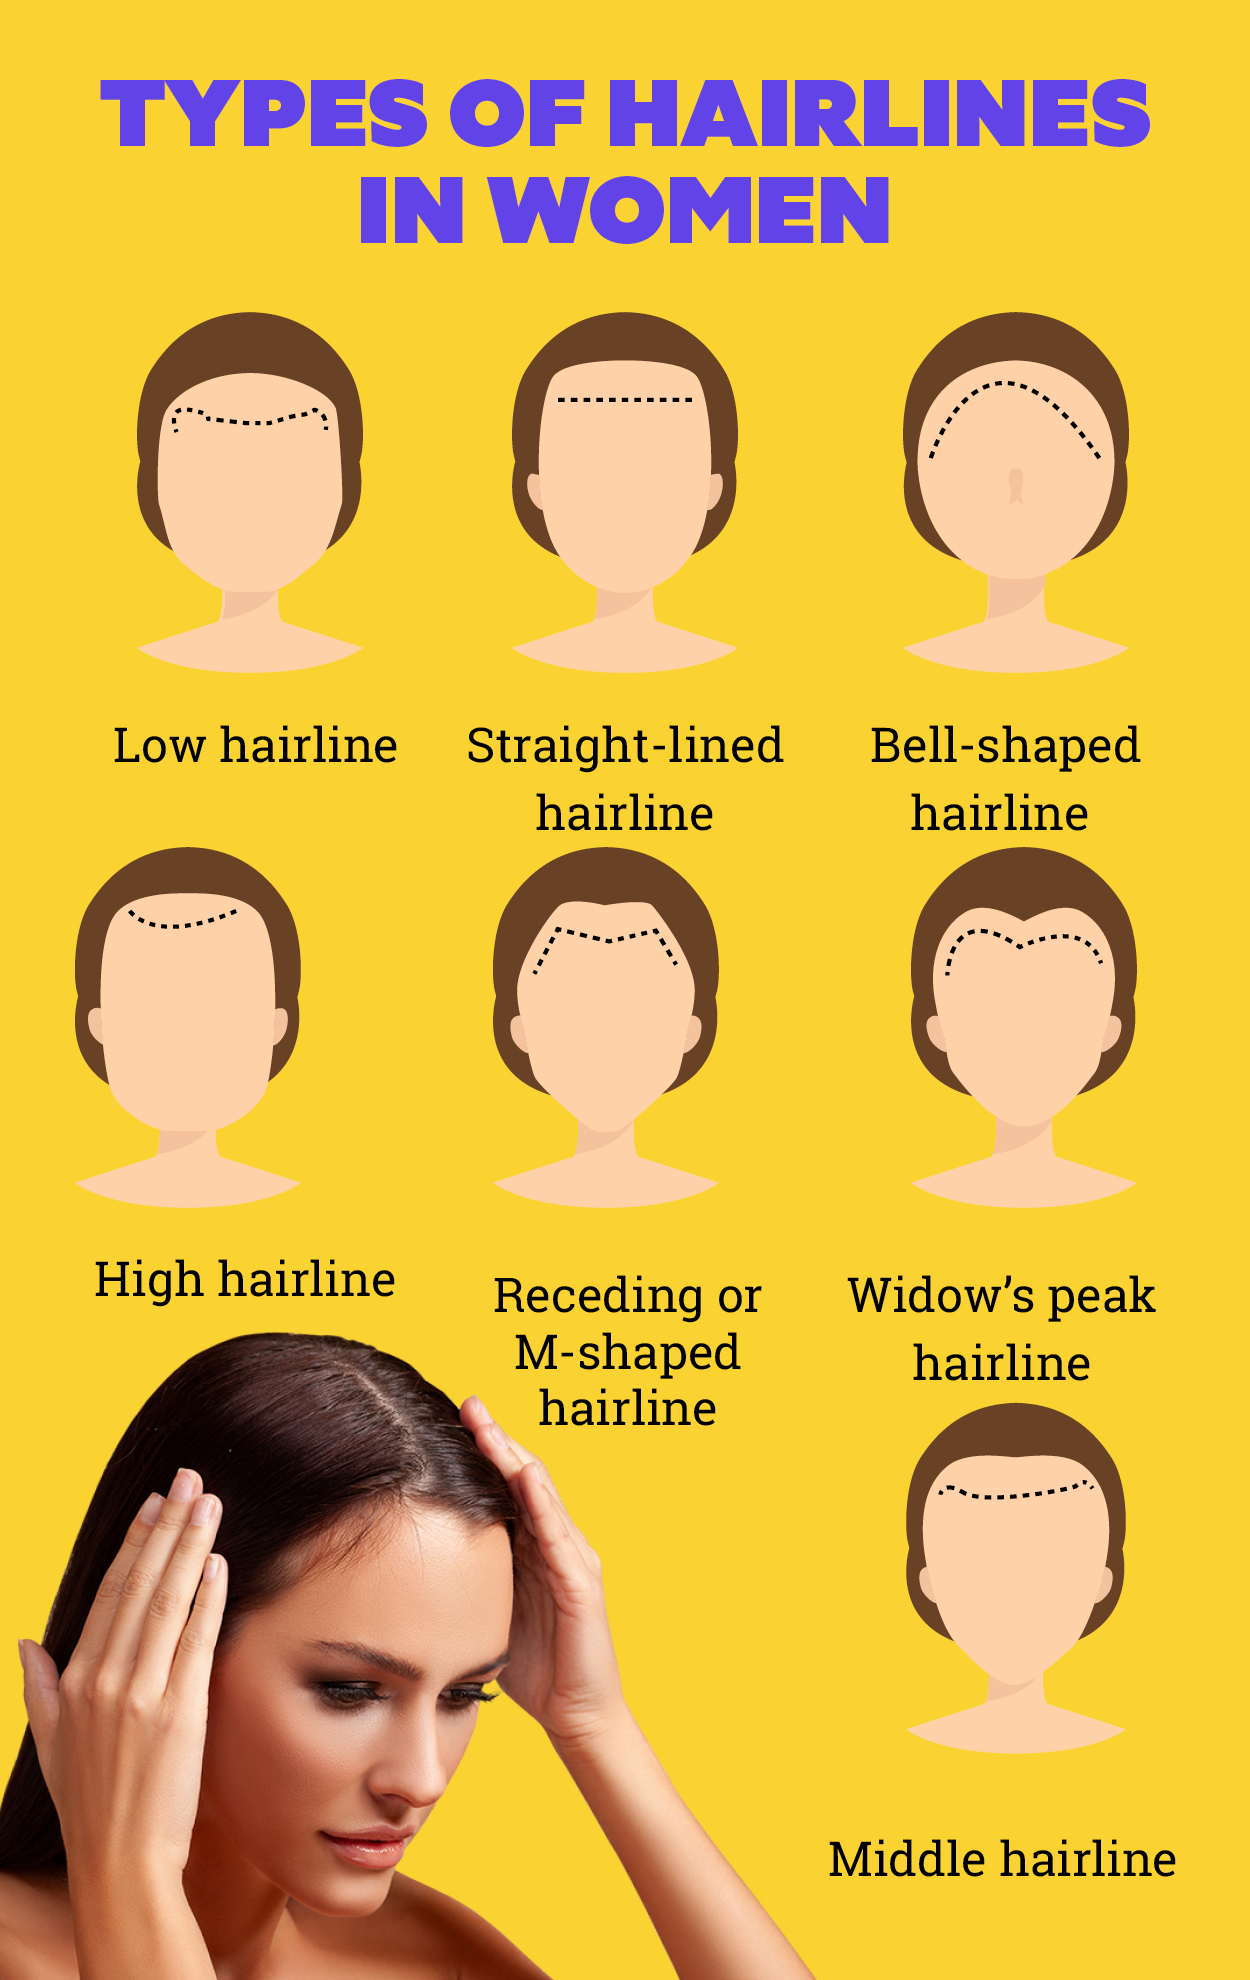 FAQs about hairlines